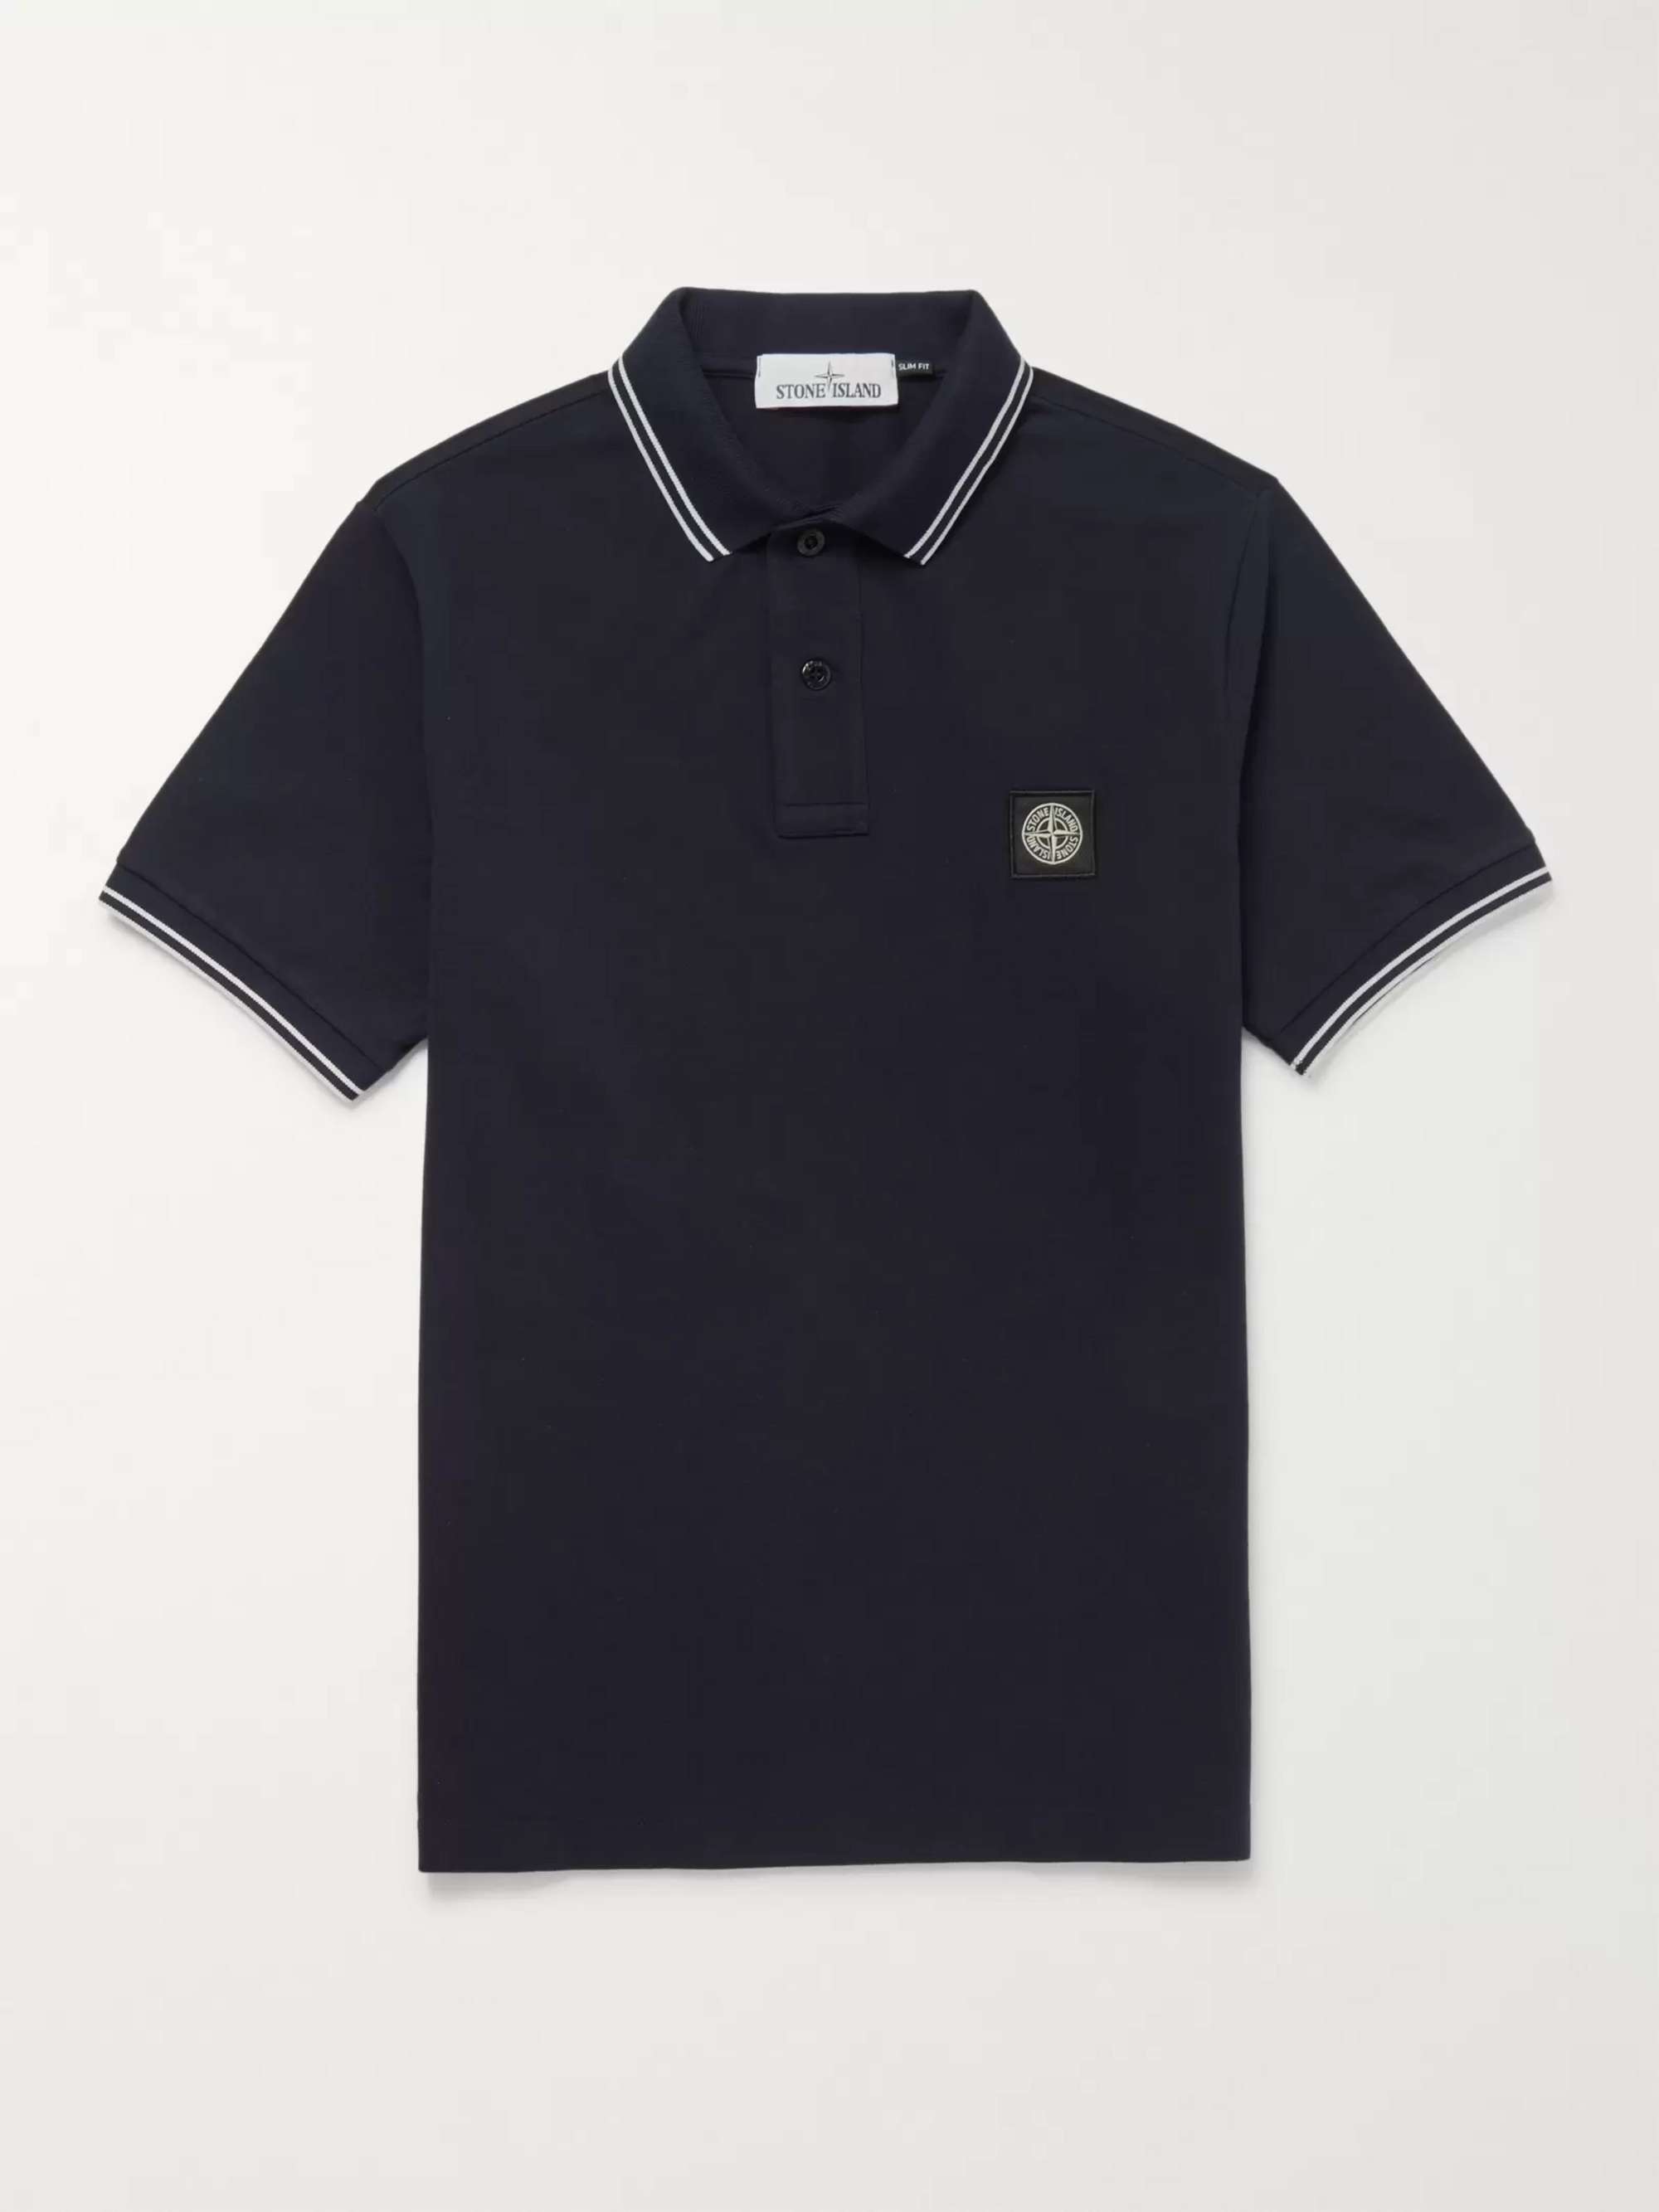 STONE ISLAND Slim-Fit Contrast-Tipped Stretch-Cotton Piqué Polo Shirt